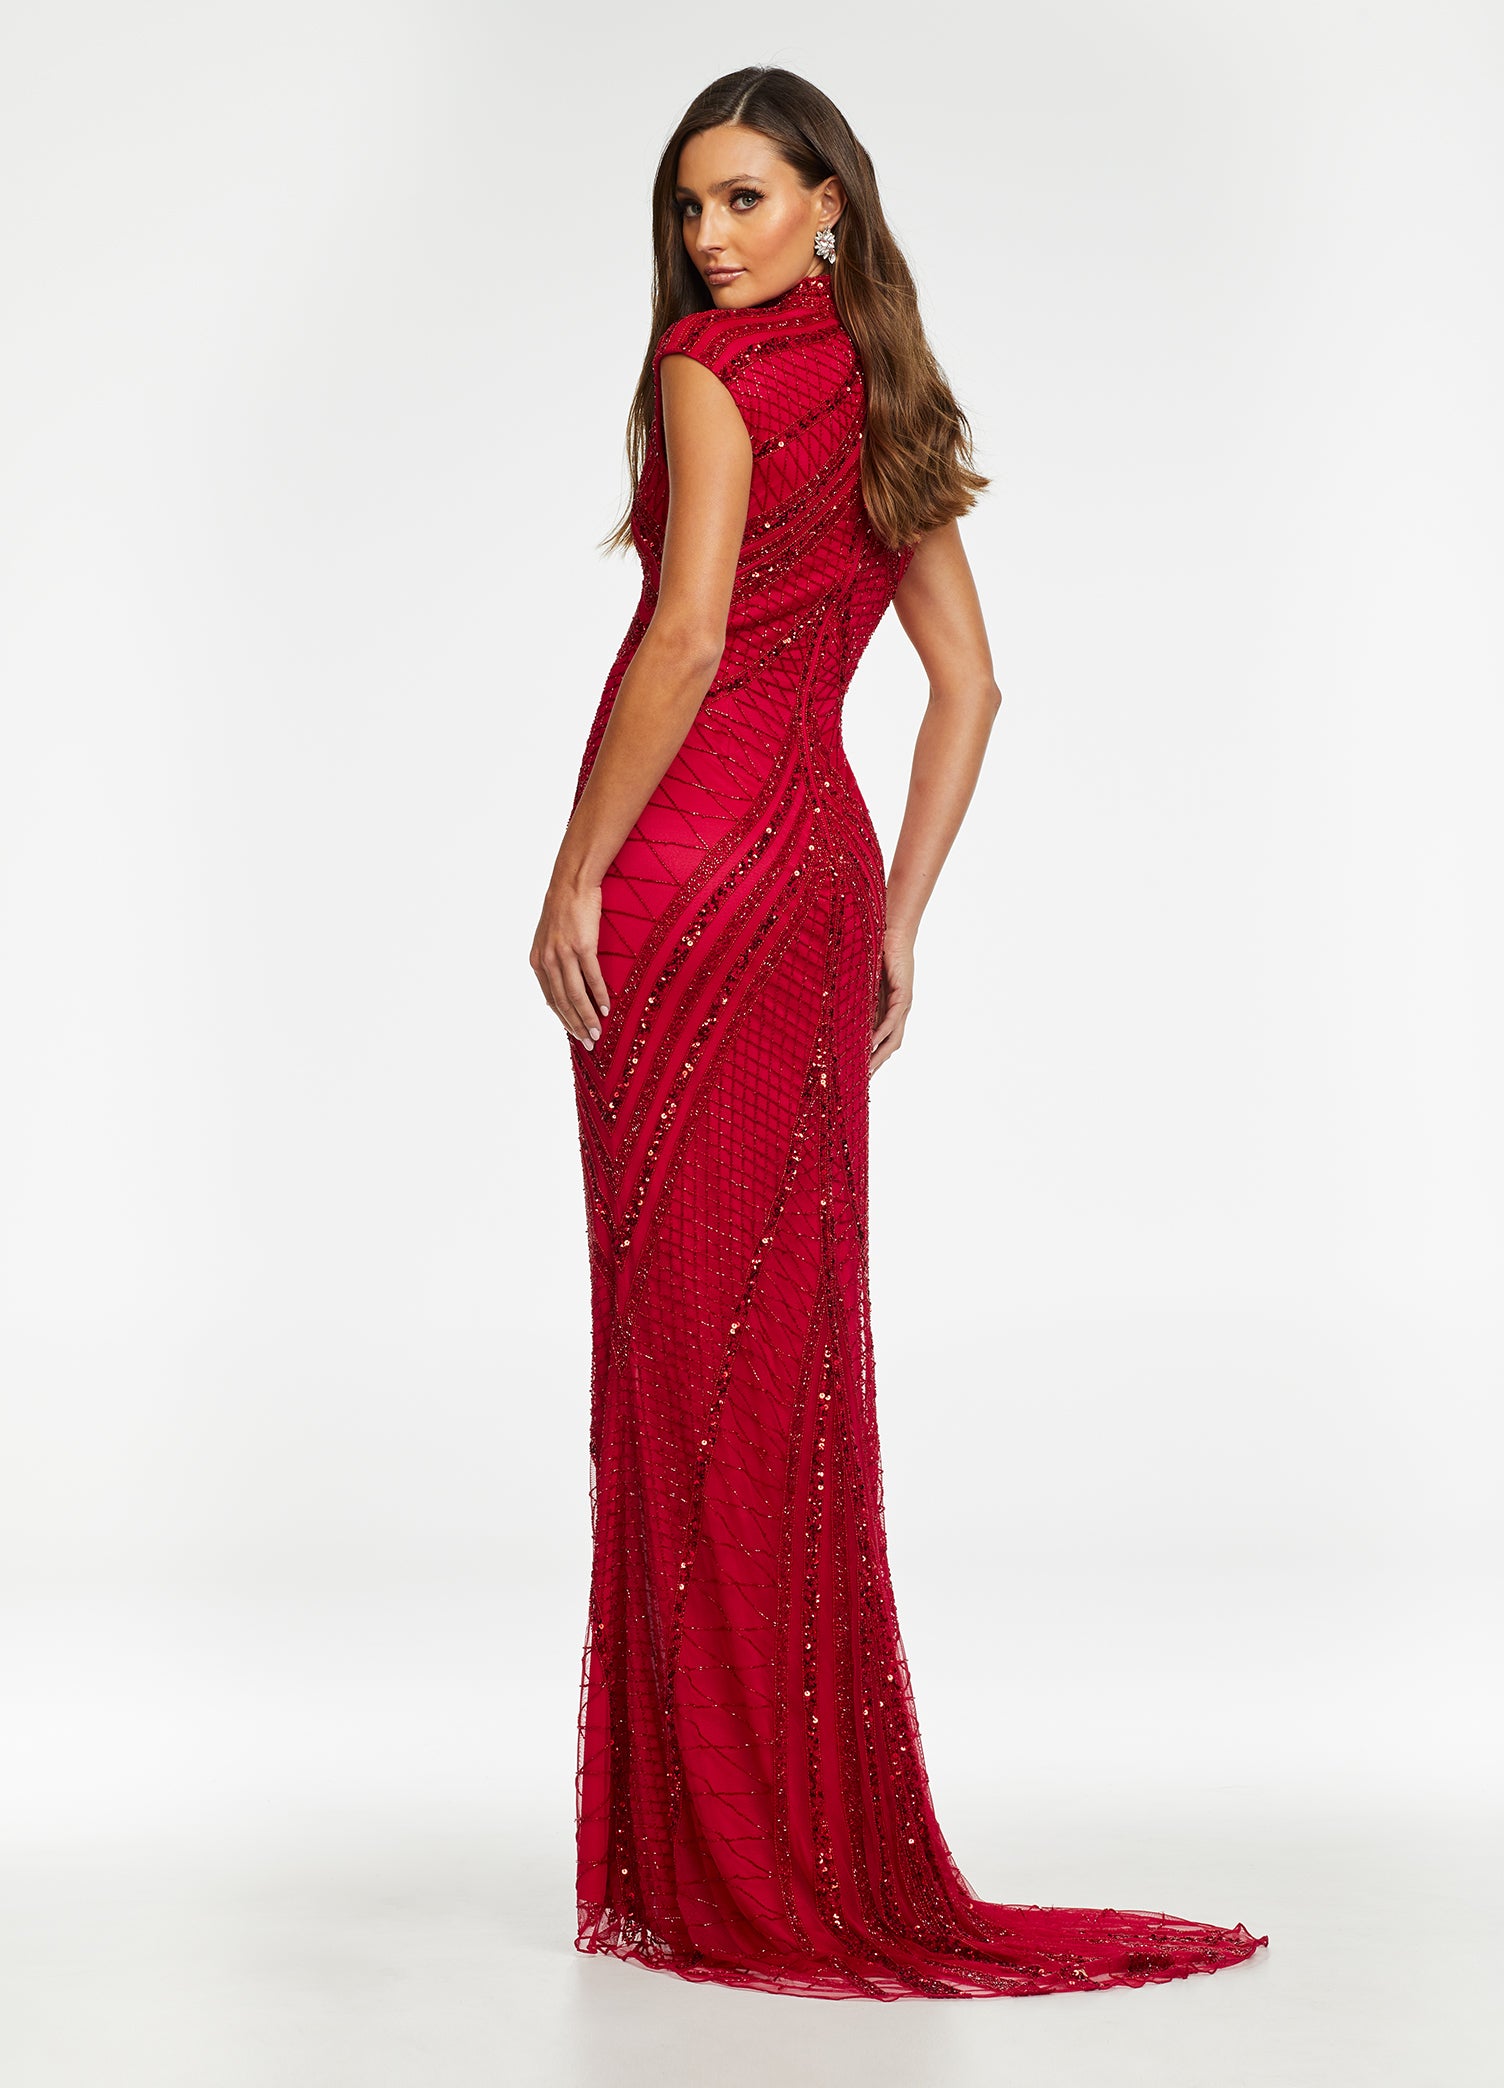 Ashley Lauren 1624 high neckline beaded sequins fitted evening gown with front slit with a figure flattering beaded design pageant gown prom dress Available colors: Silver/Pewter, Rose Gold/Navy, Charcoal, Rose Gold, Silver/Ivory, Nebula Green Available sizes: 0, 2, 4, 6, 8, 10, 12, 14, 16 Look like a goddess in this fitted high neck dress that is fully beaded with an intricate bead pattern from head to toe.